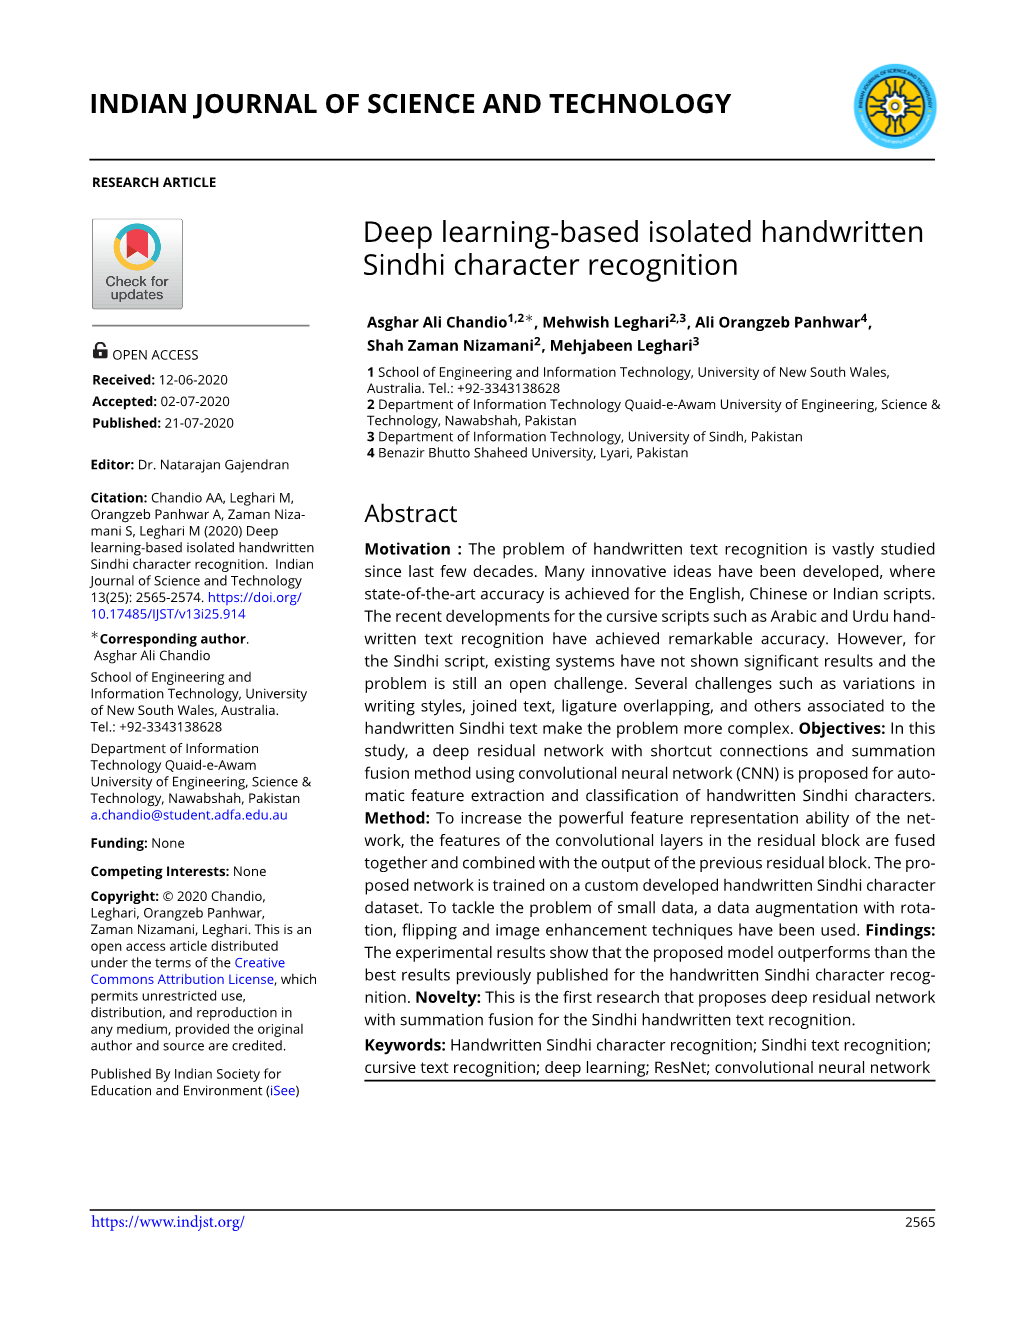 Deep Learning-Based Isolated Handwritten Sindhi Character Recognition